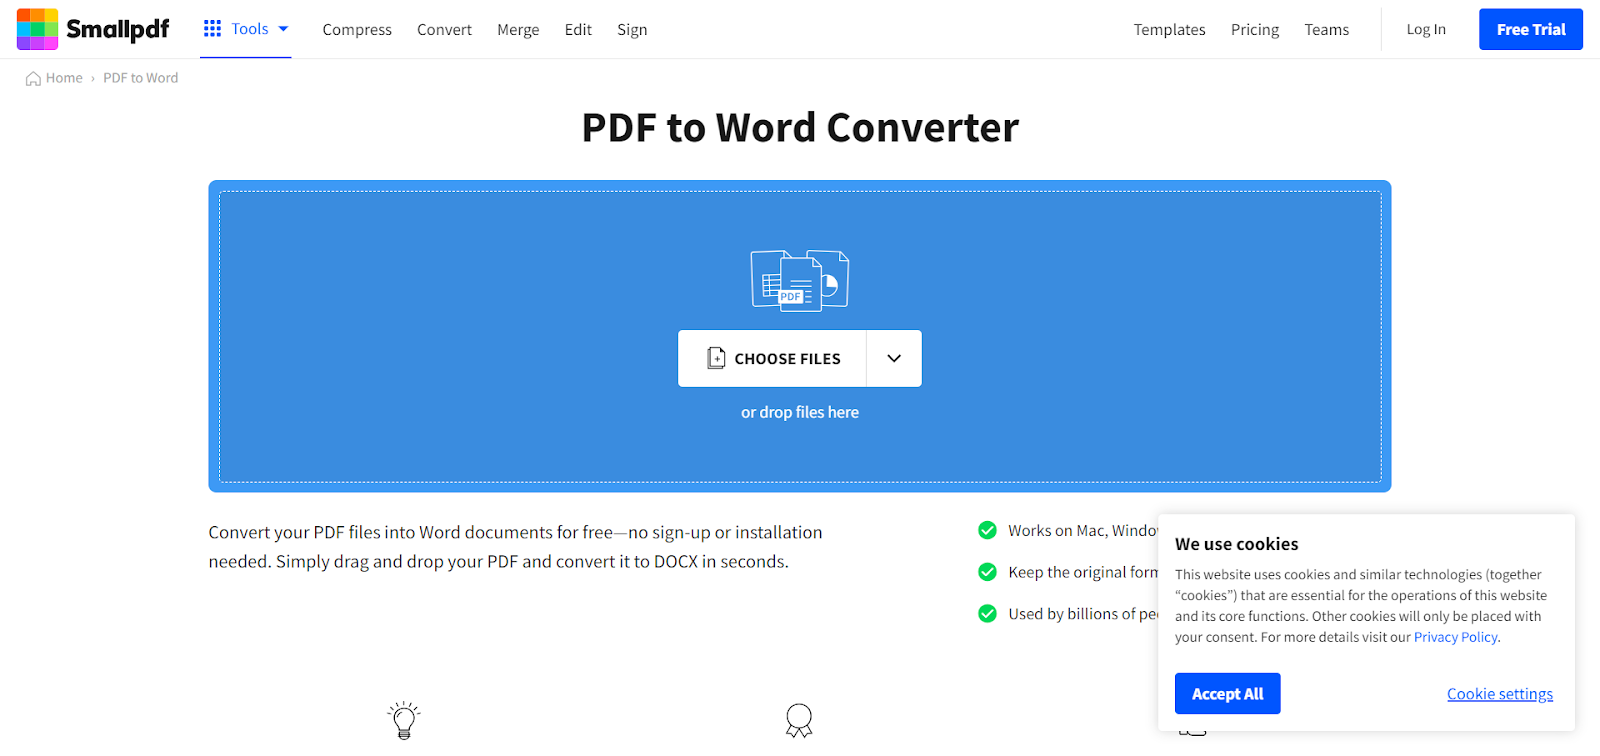 smallpdf converting a pdf to word